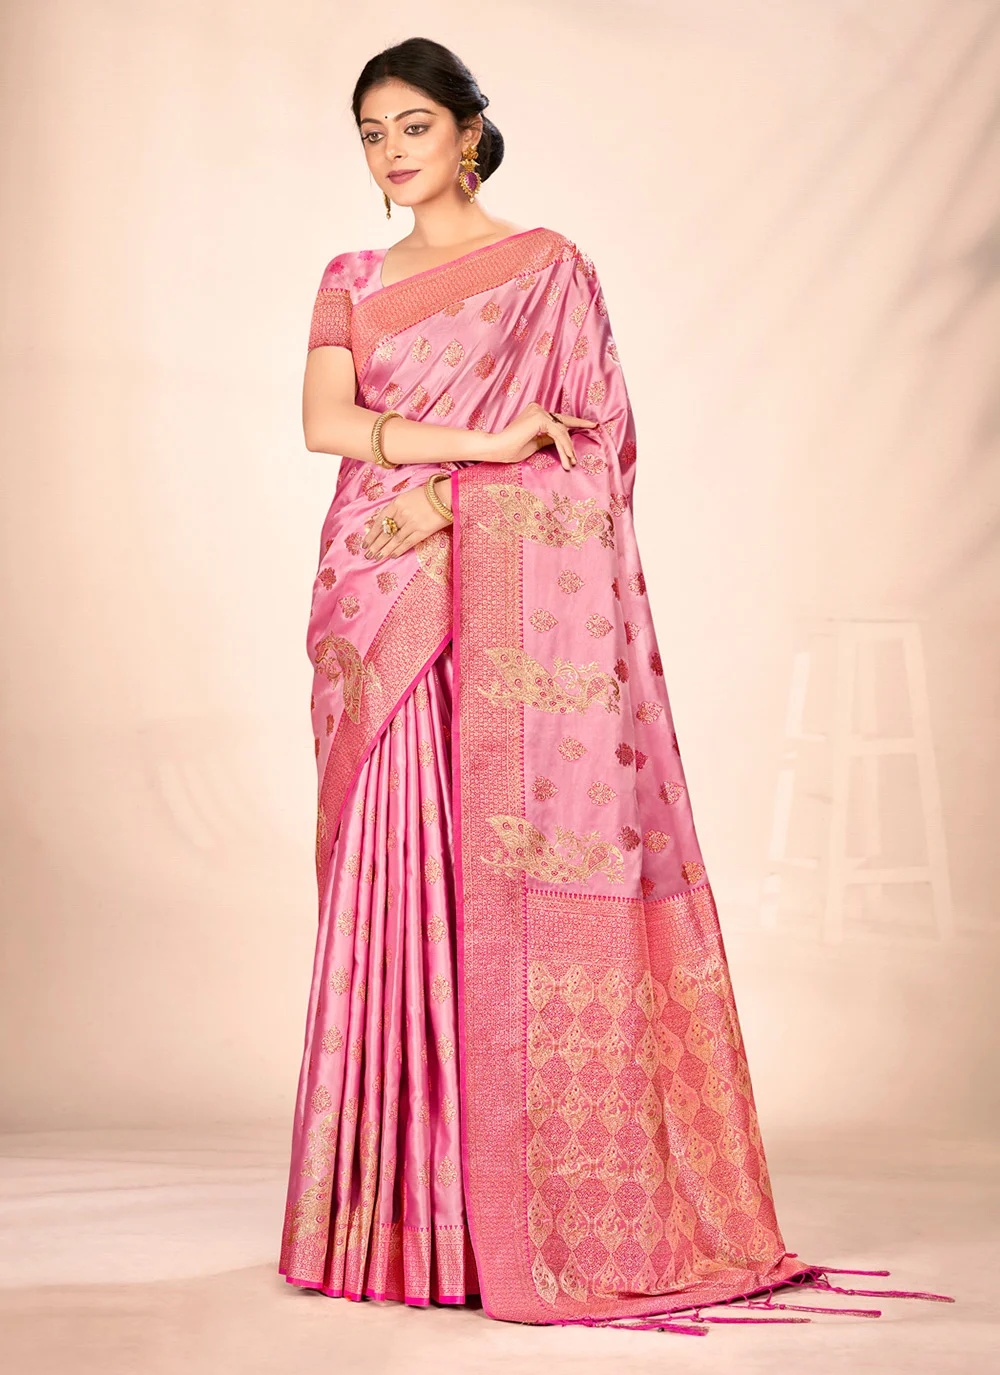 Exquisite World of Indian Sarees: Your Guide to Online Shopping at Sareesaga